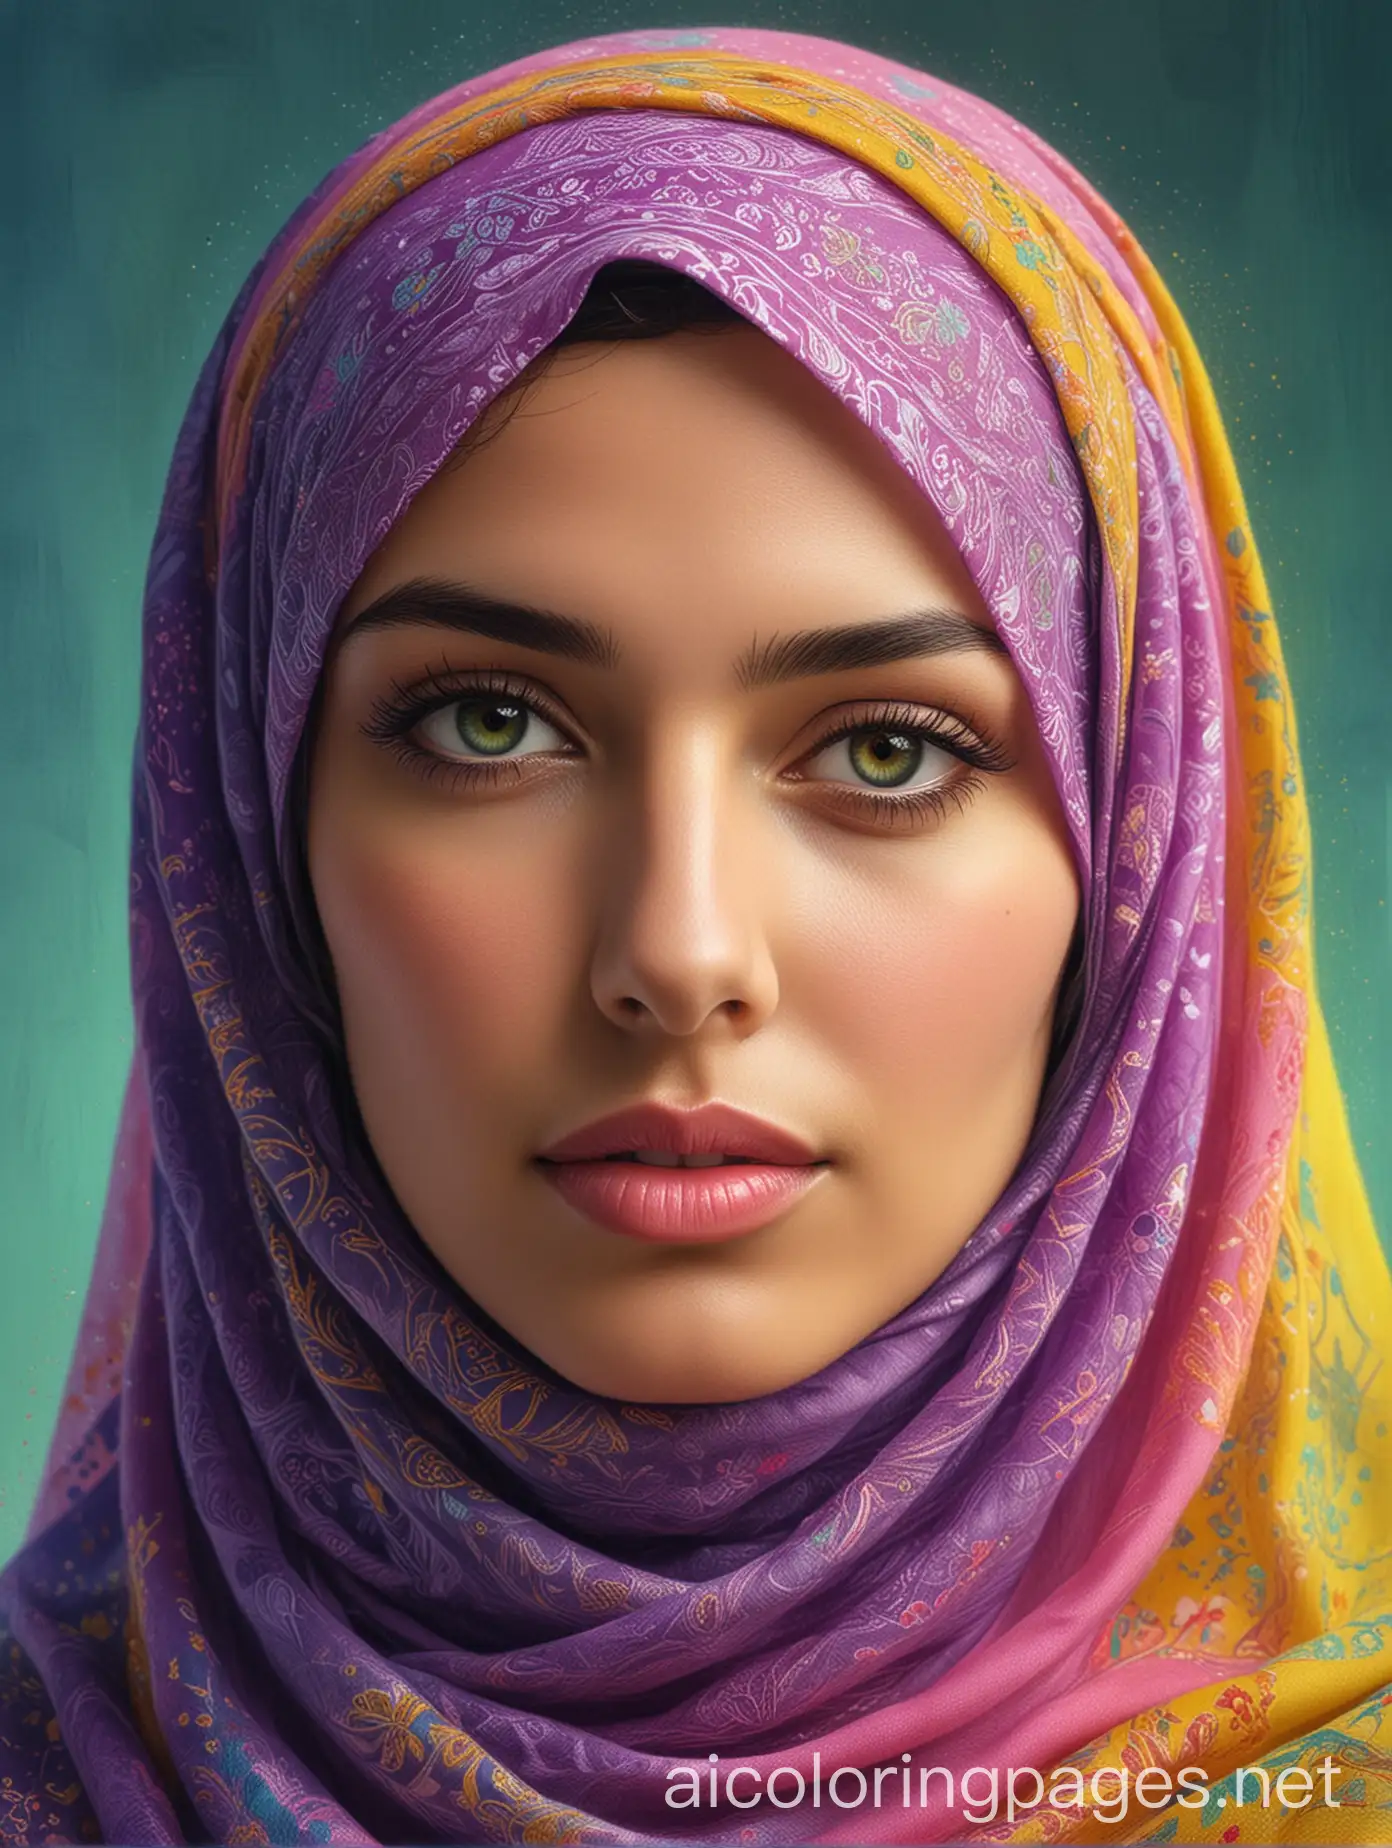 Modern-Digital-Art-Woman-in-Colorful-Hijab-Against-Vibrant-Background